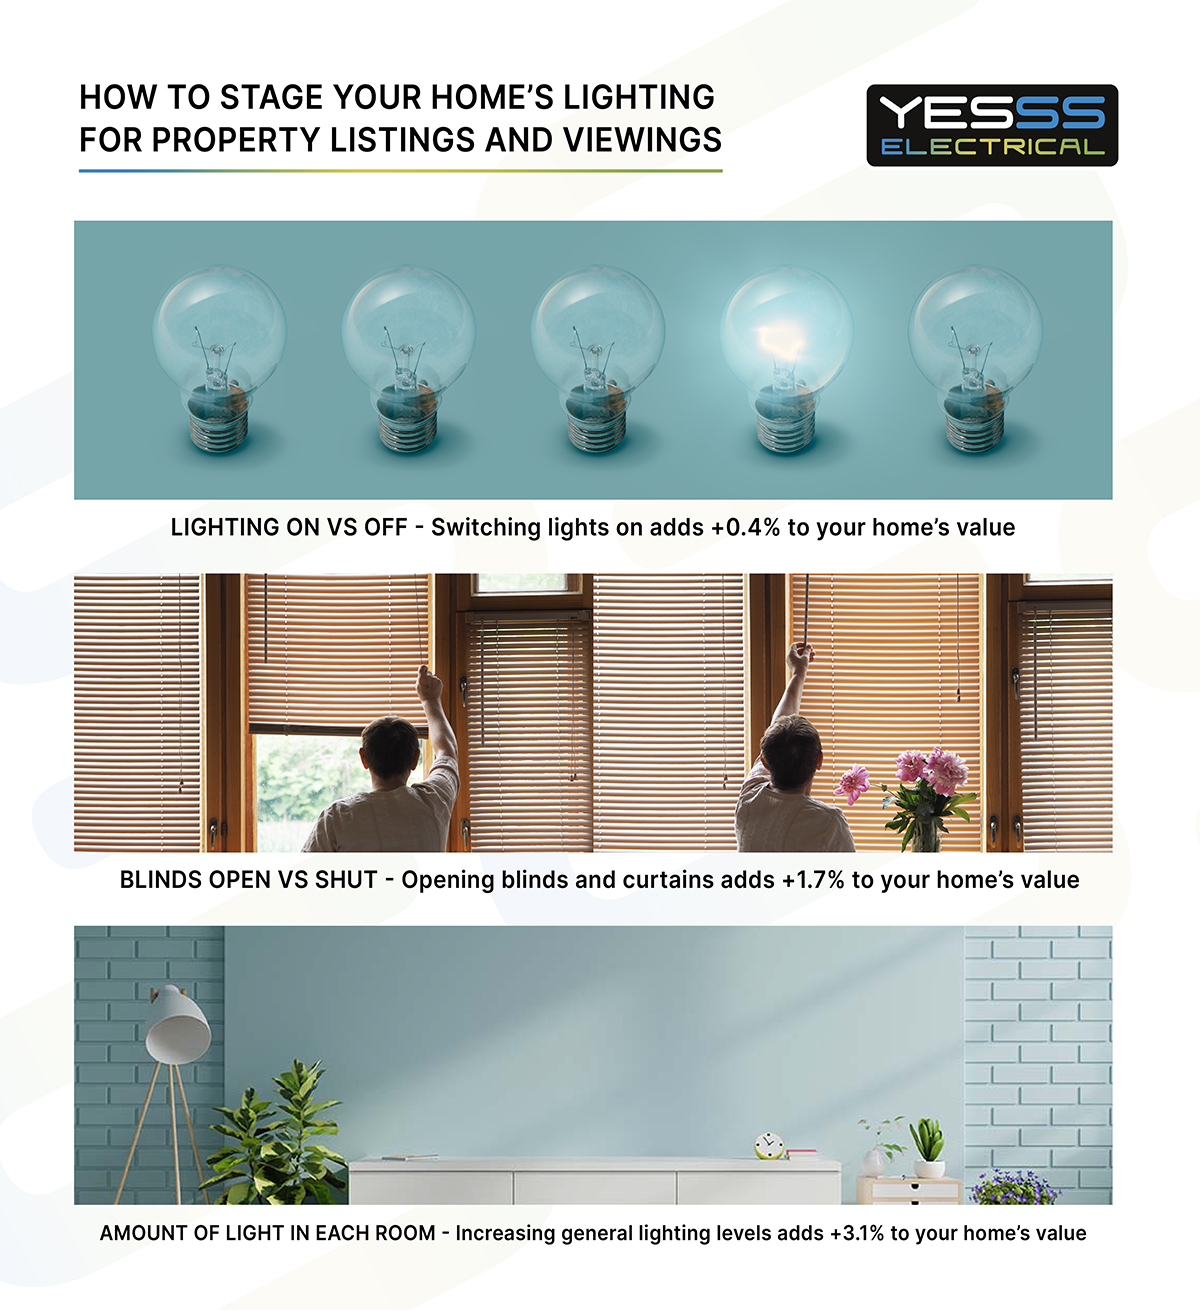 How to stage your home’s lighting for property listings and viewings 